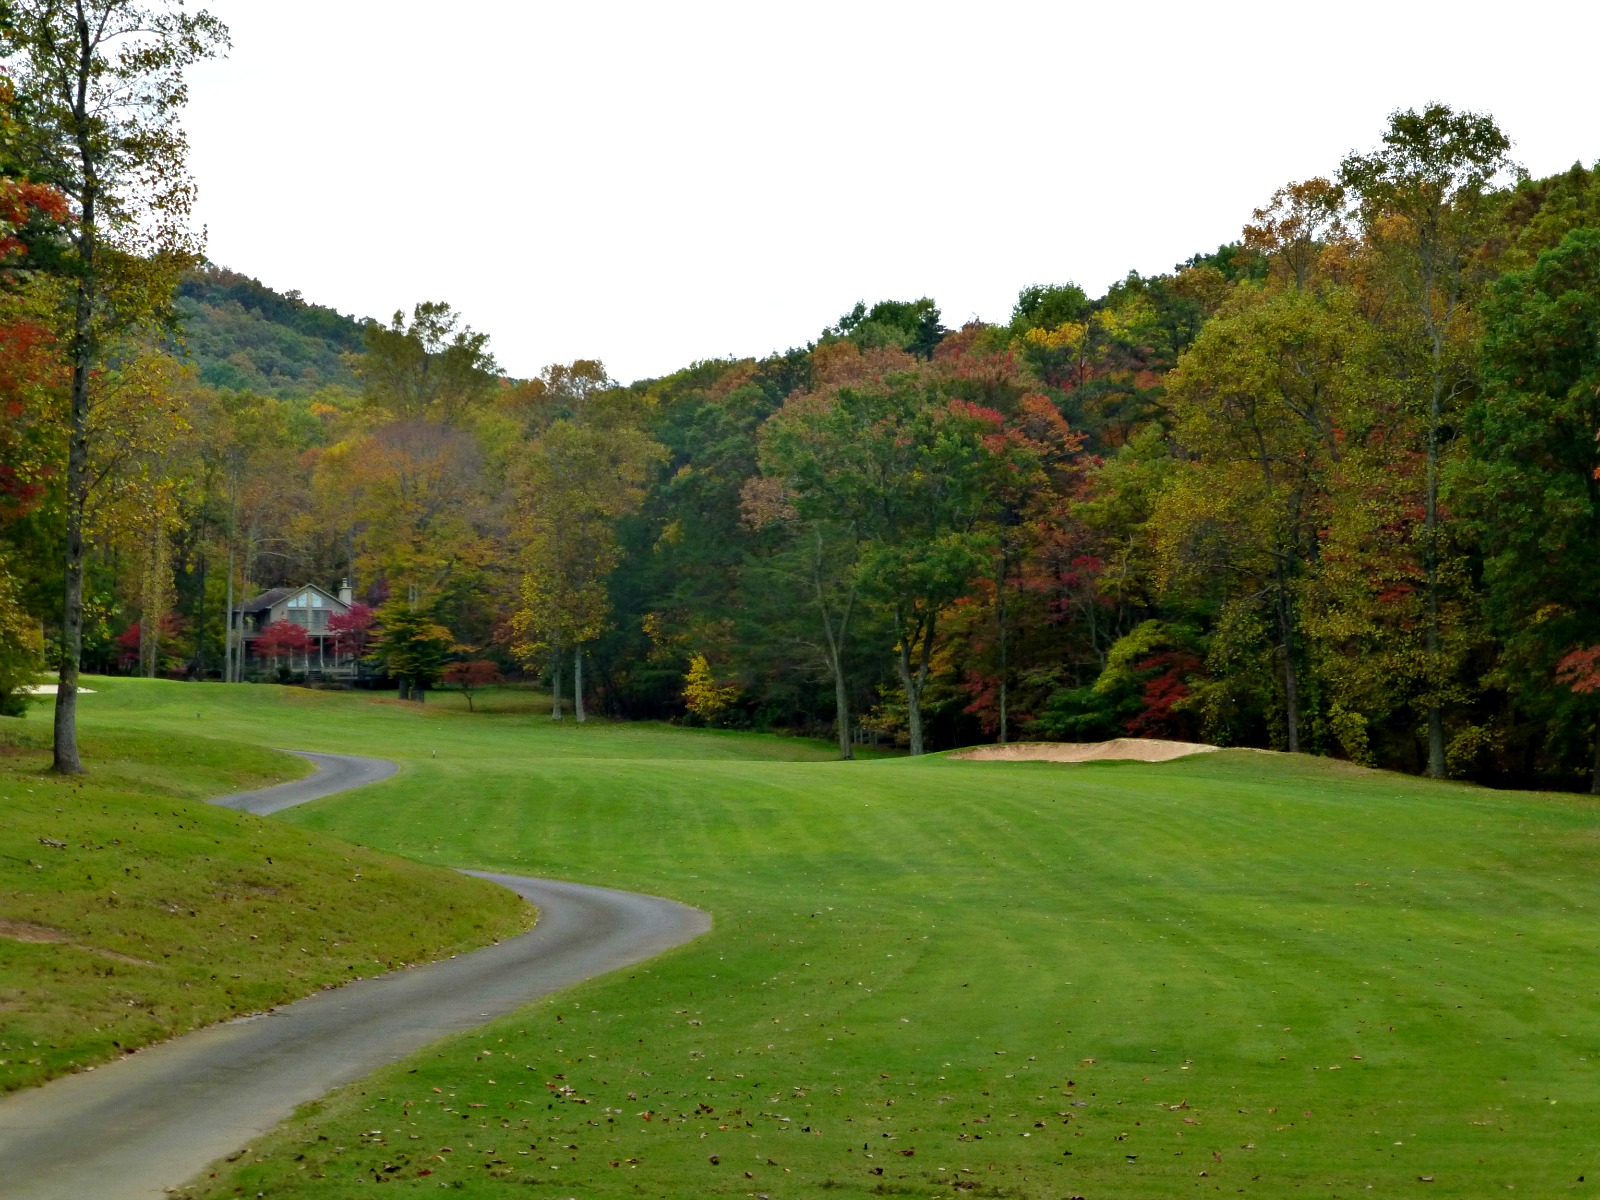 October 25, 2015 - Fall color on Hole 5 of the Bent Tree golf course